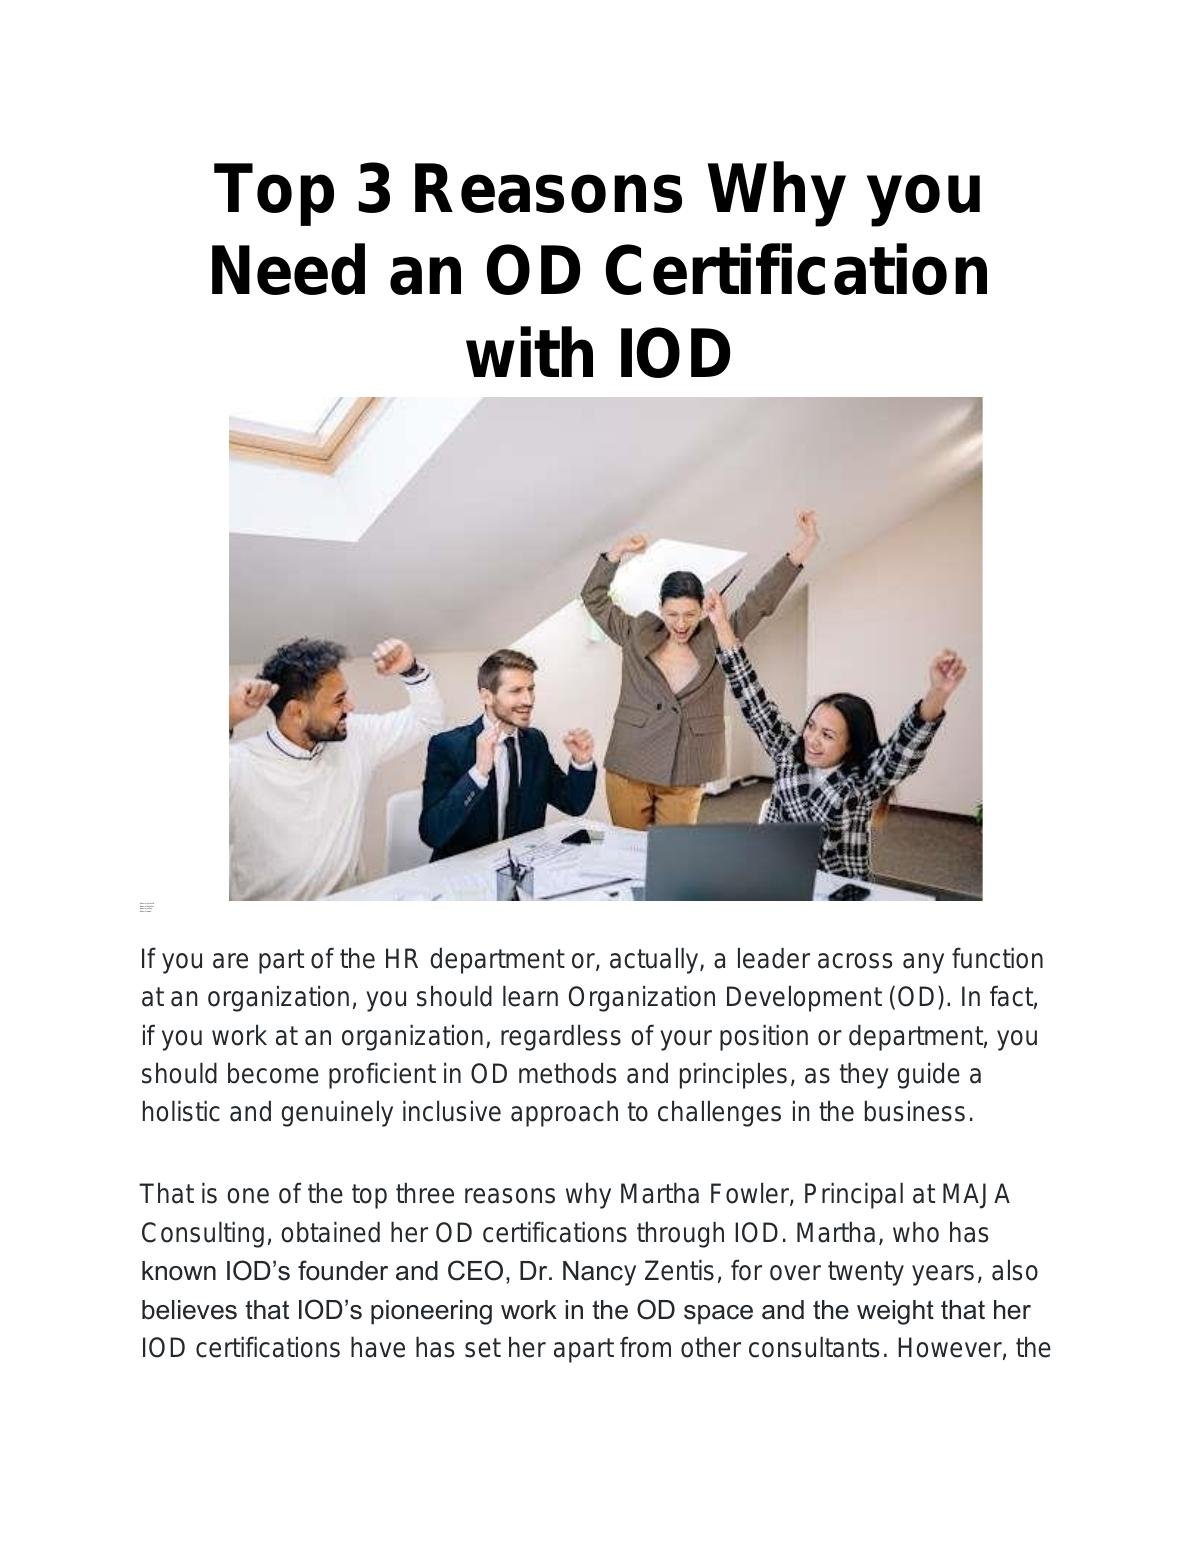 Top 3 Reasons Why you Need an OD Certification